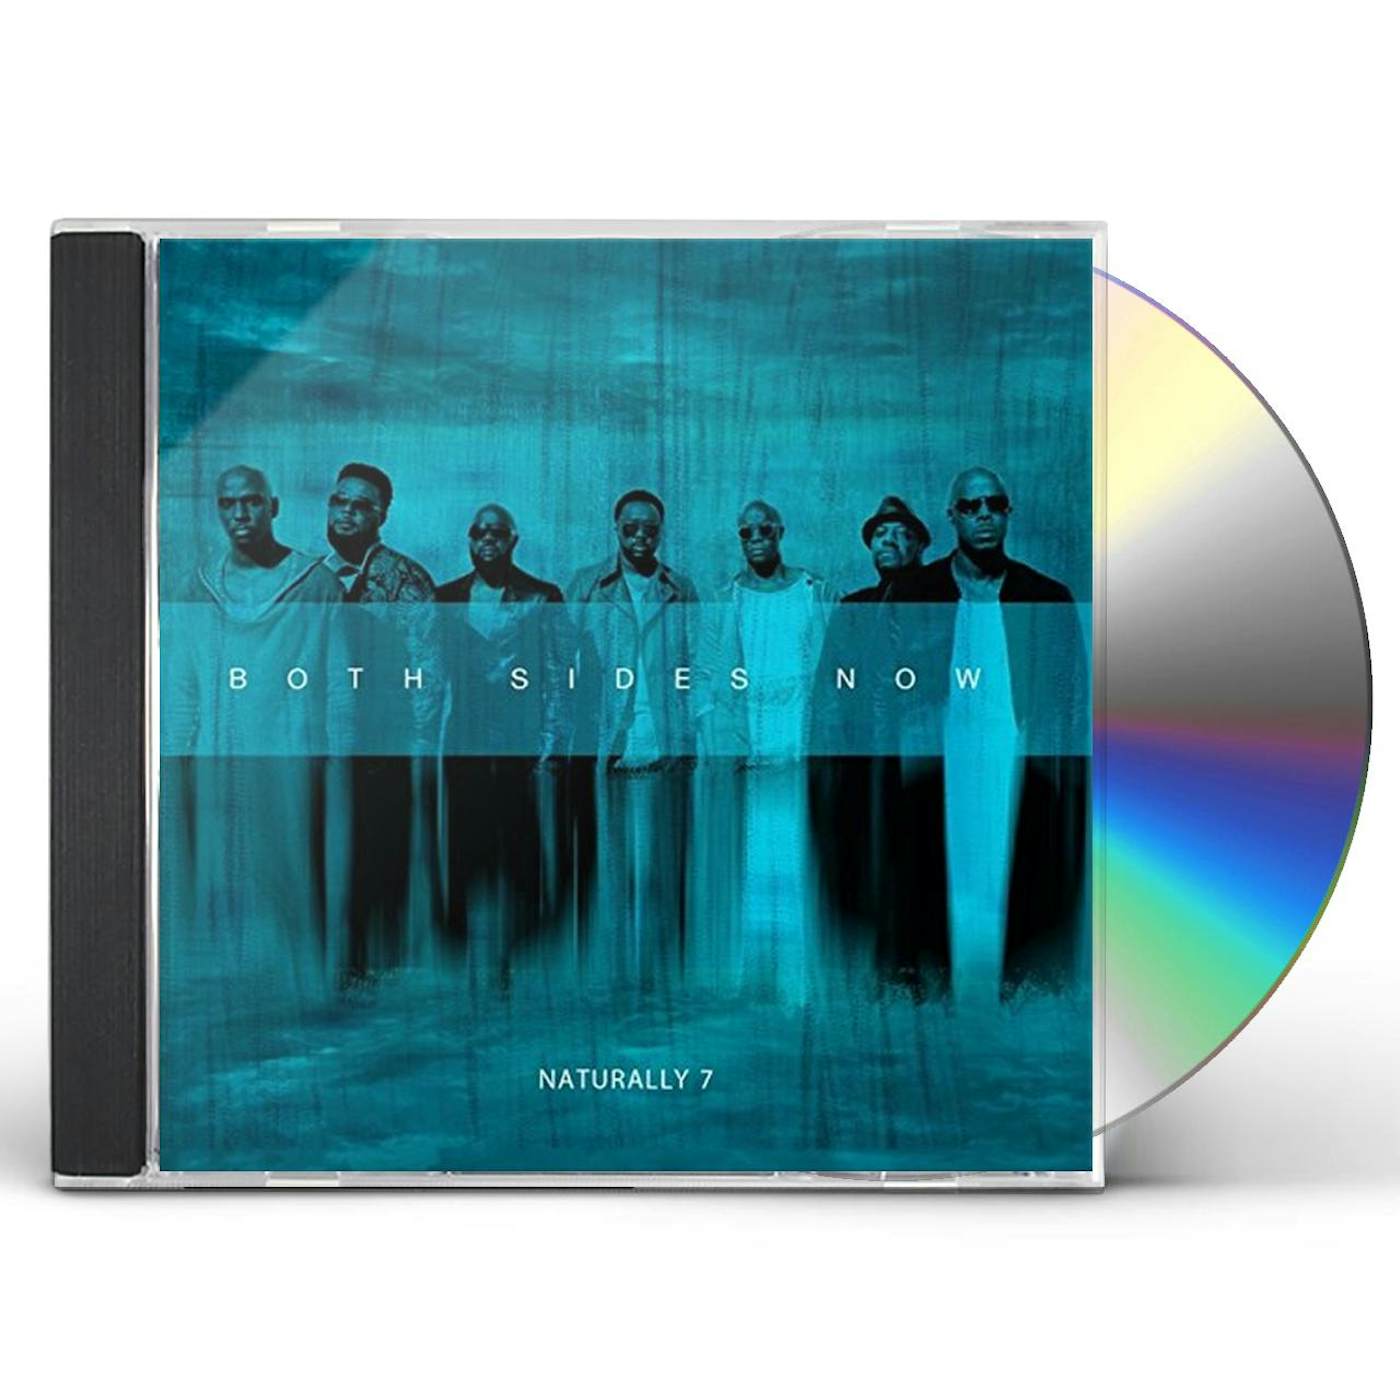 Naturally 7 BOTH SIDES NOW CD